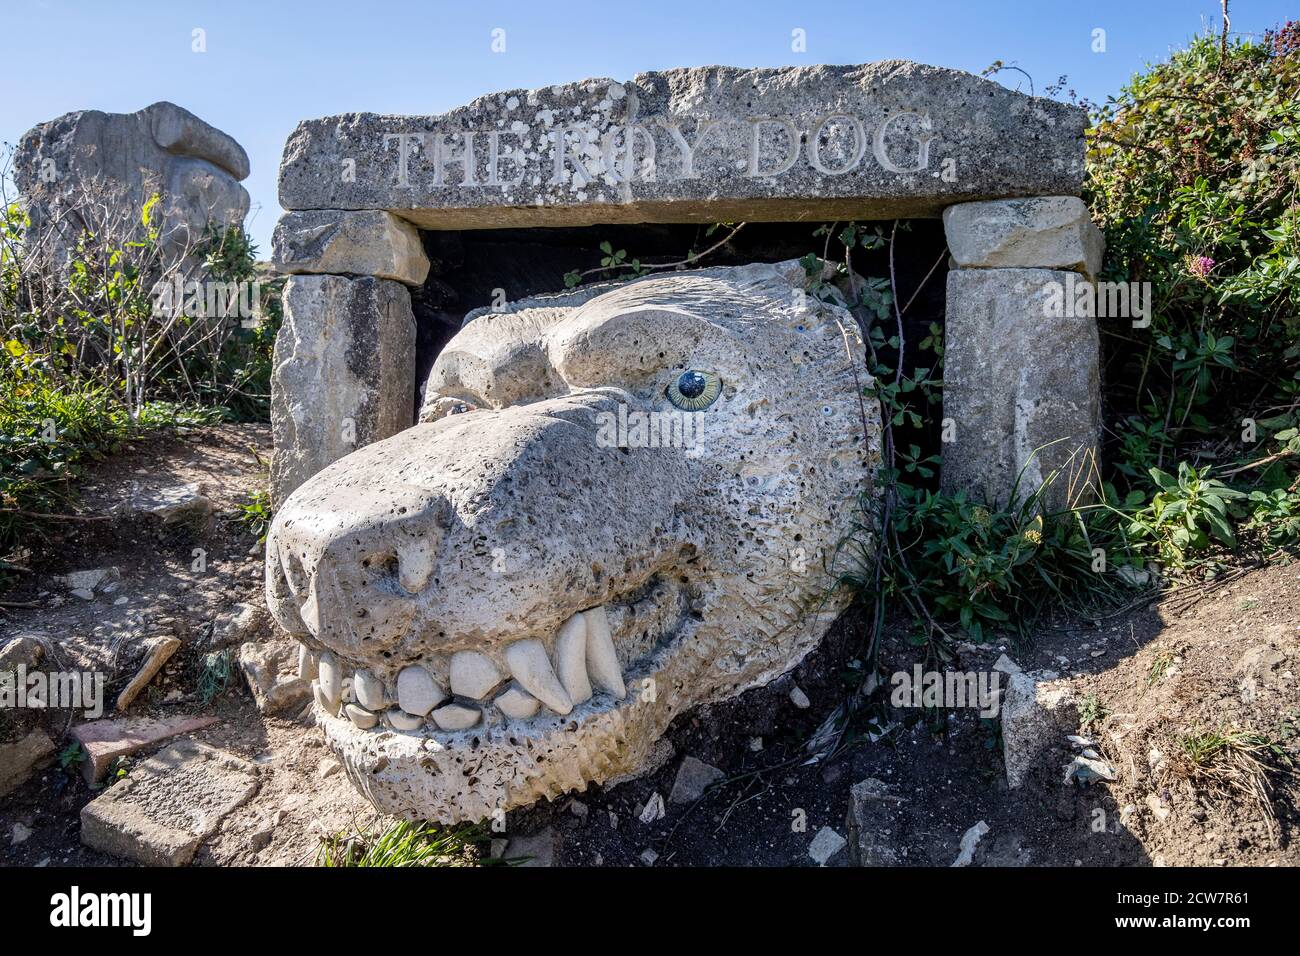 Sculpture of The Roy Dog by artist Damien Briggs carved out of Portland Stone at Tout Quarry Sculpture Park on the Isle of Portland, Dorset, UK. Stock Photo